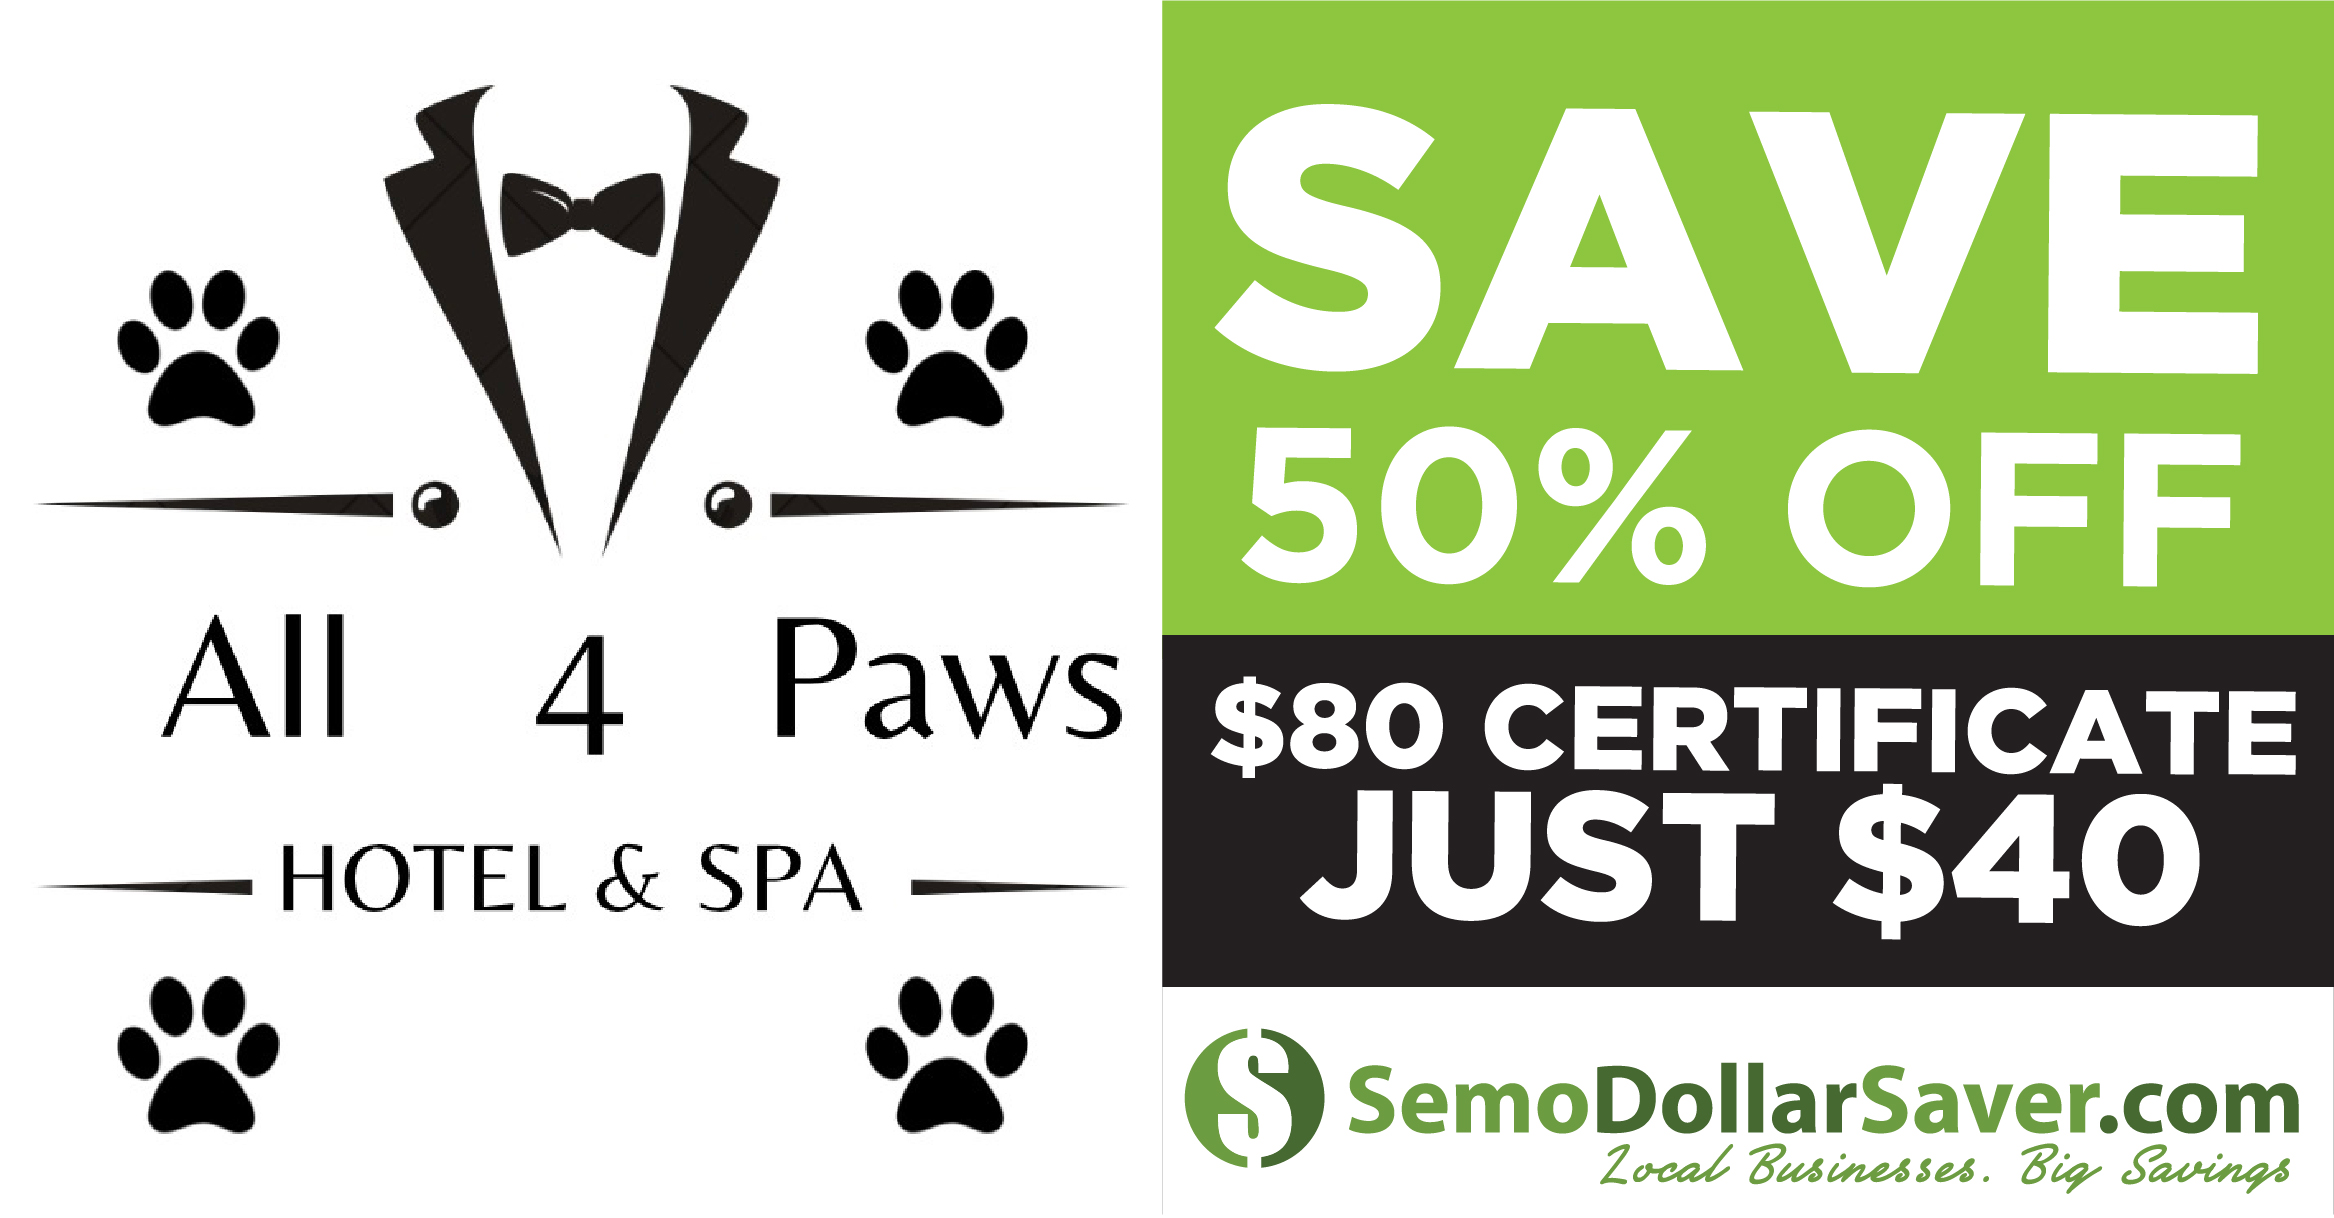 $80.00 All 4 Paws Hotel & Spa Certificate